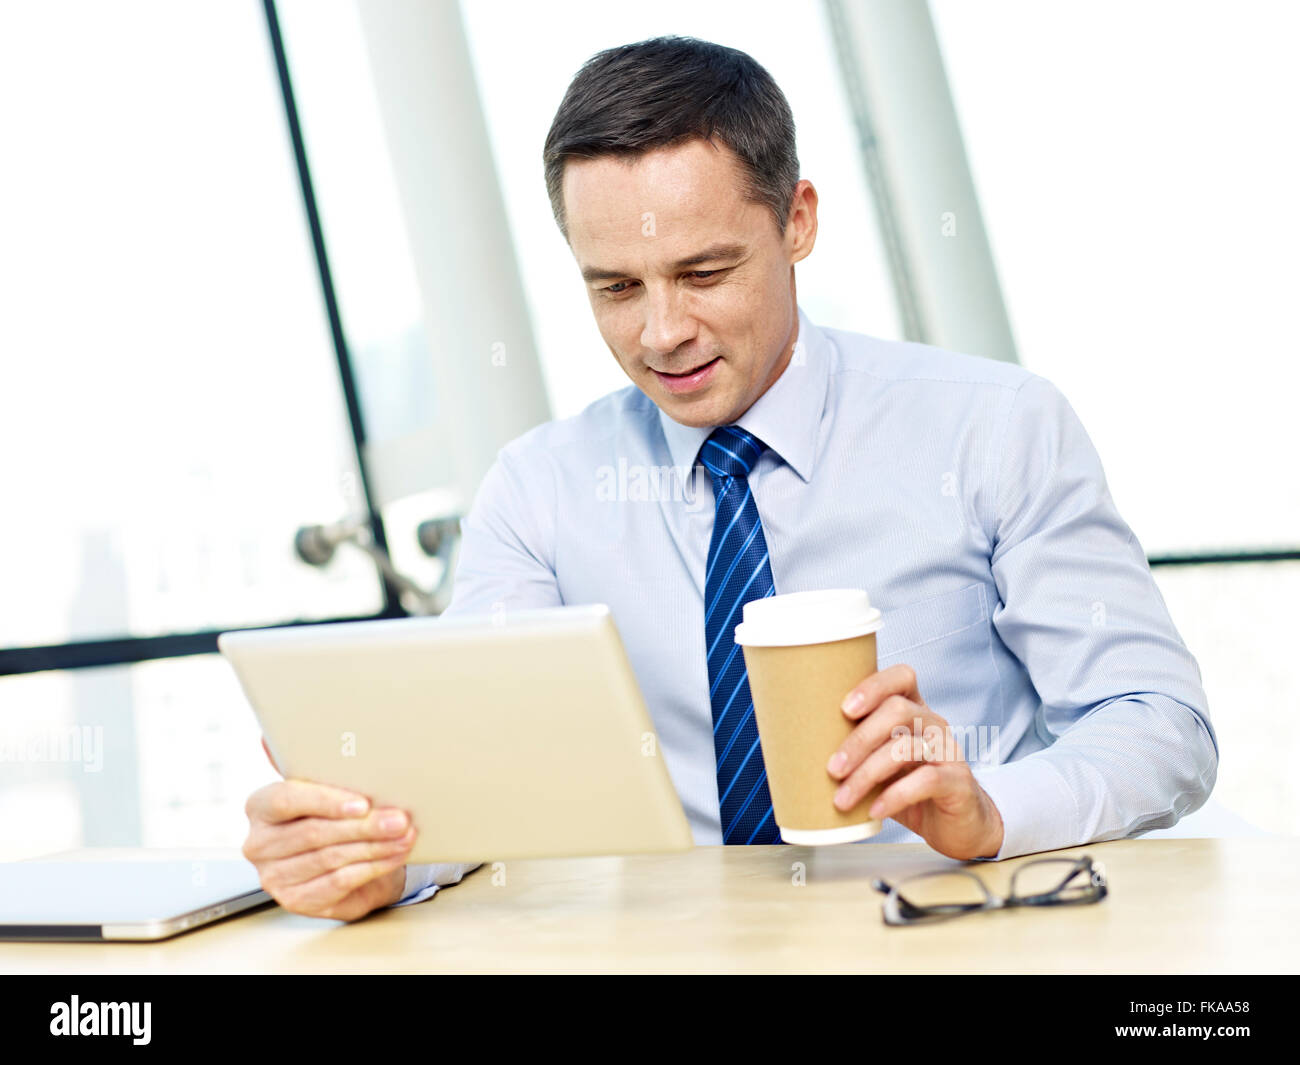 businessman working in office using ipad Stock Photo